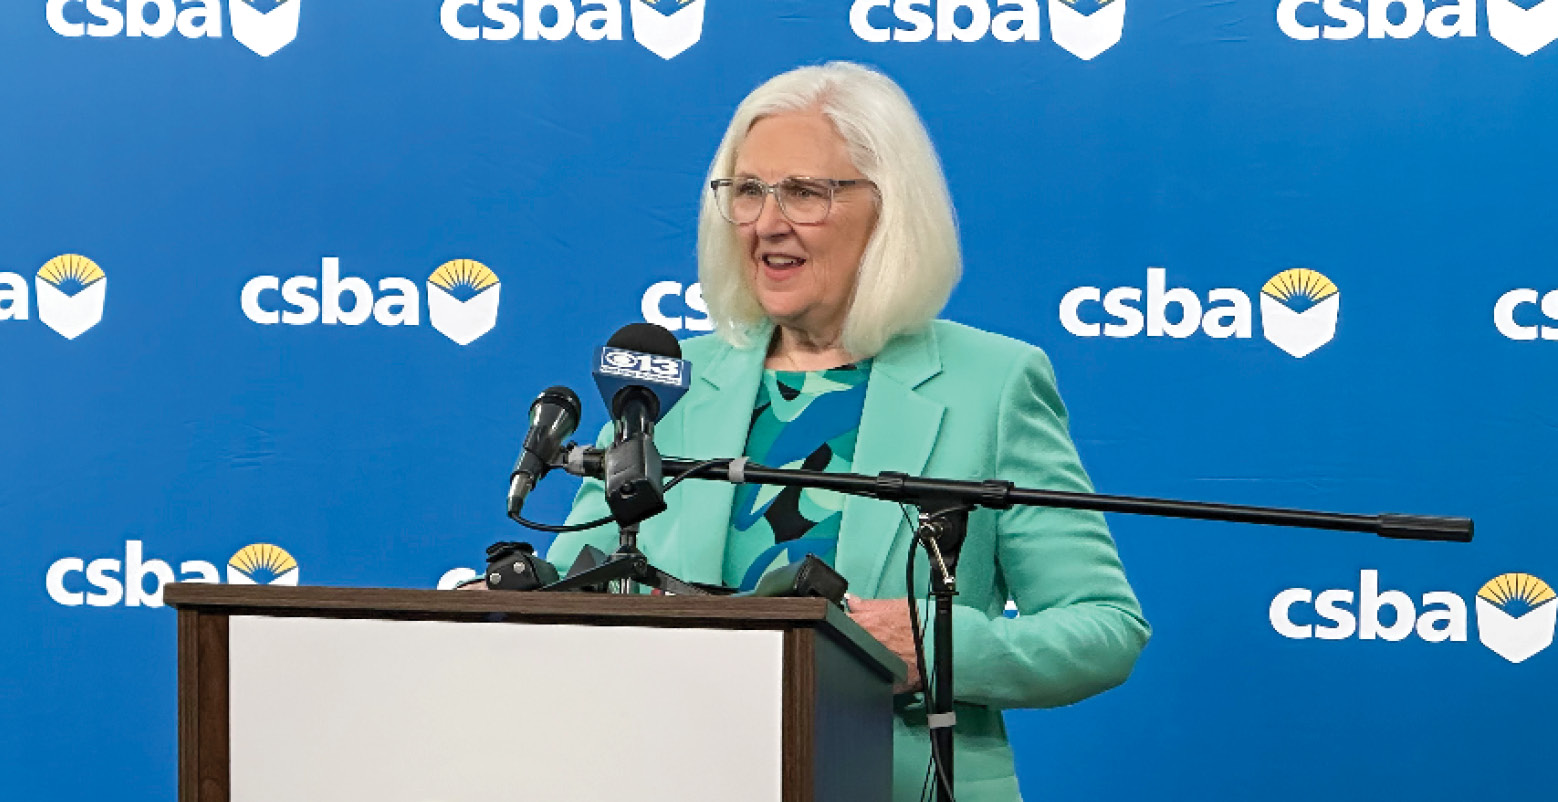 CSBA President Susan Markarian wearing glasses and a teal balzer and blouse, speaks into the podium microphone during a June 26 press conference